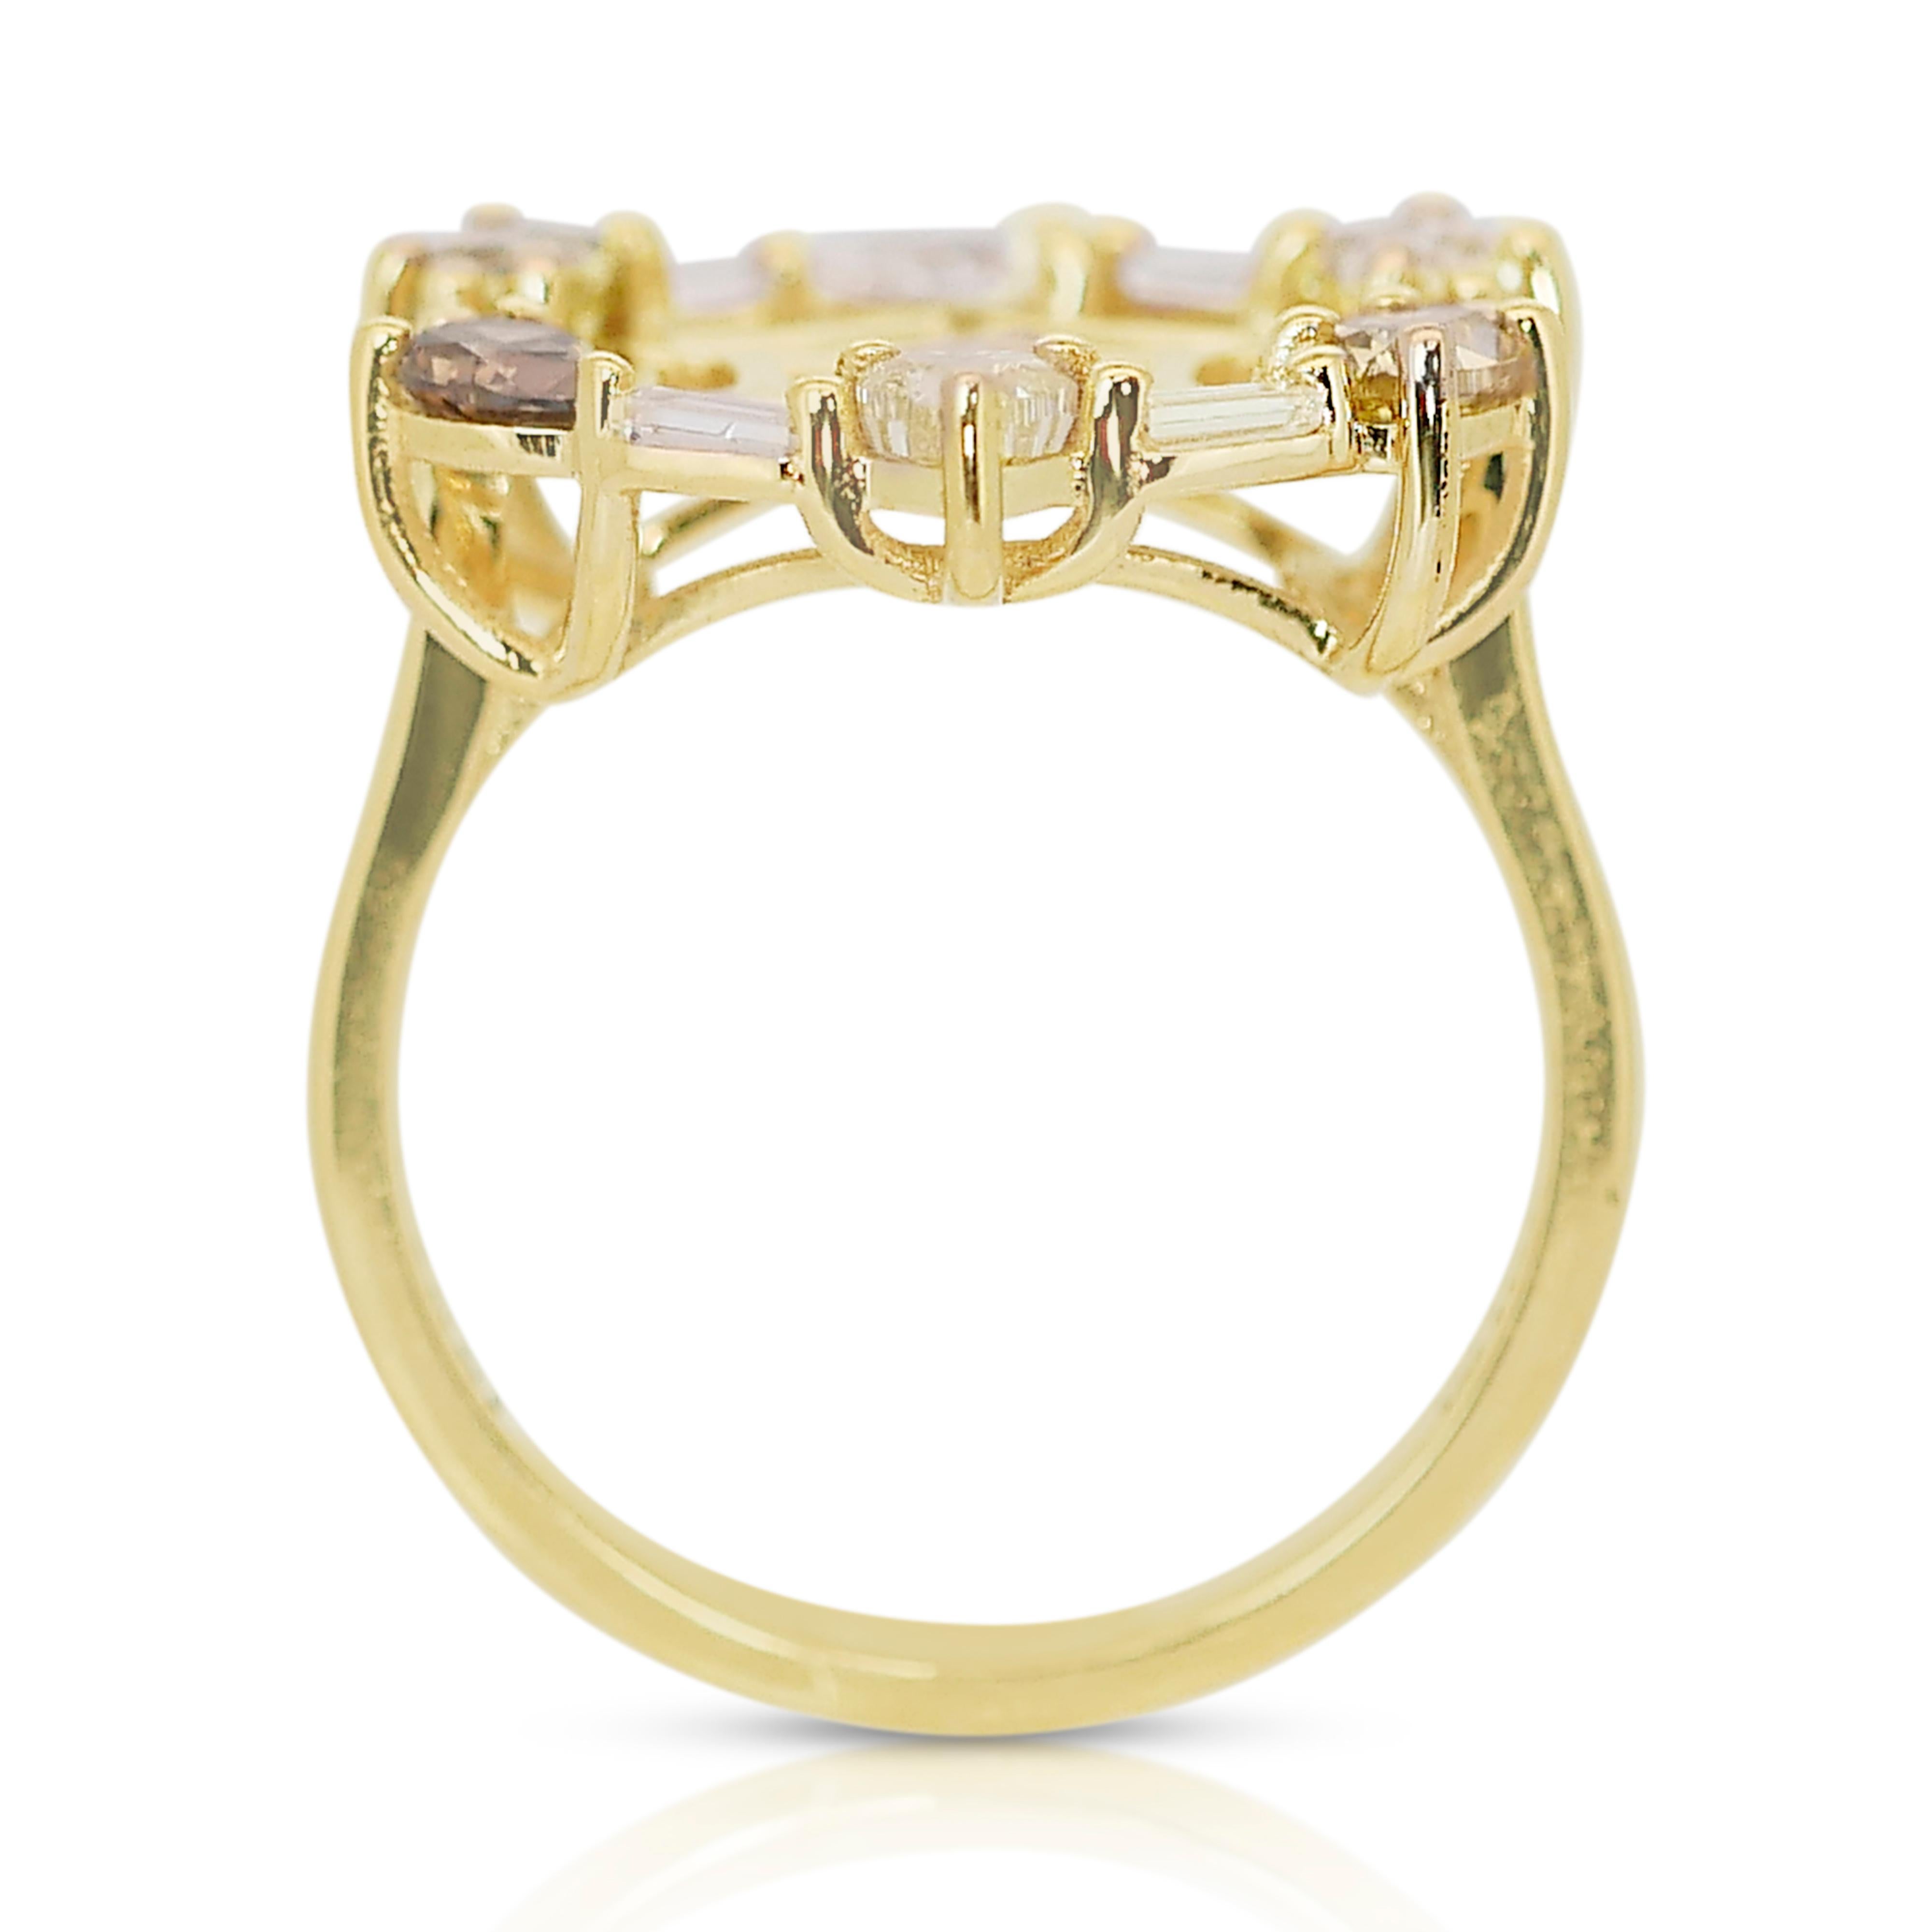 Stylish 1.34ct Diamonds Fancy-Colored Ring in 18k Yellow Gold - IGI Certified For Sale 2